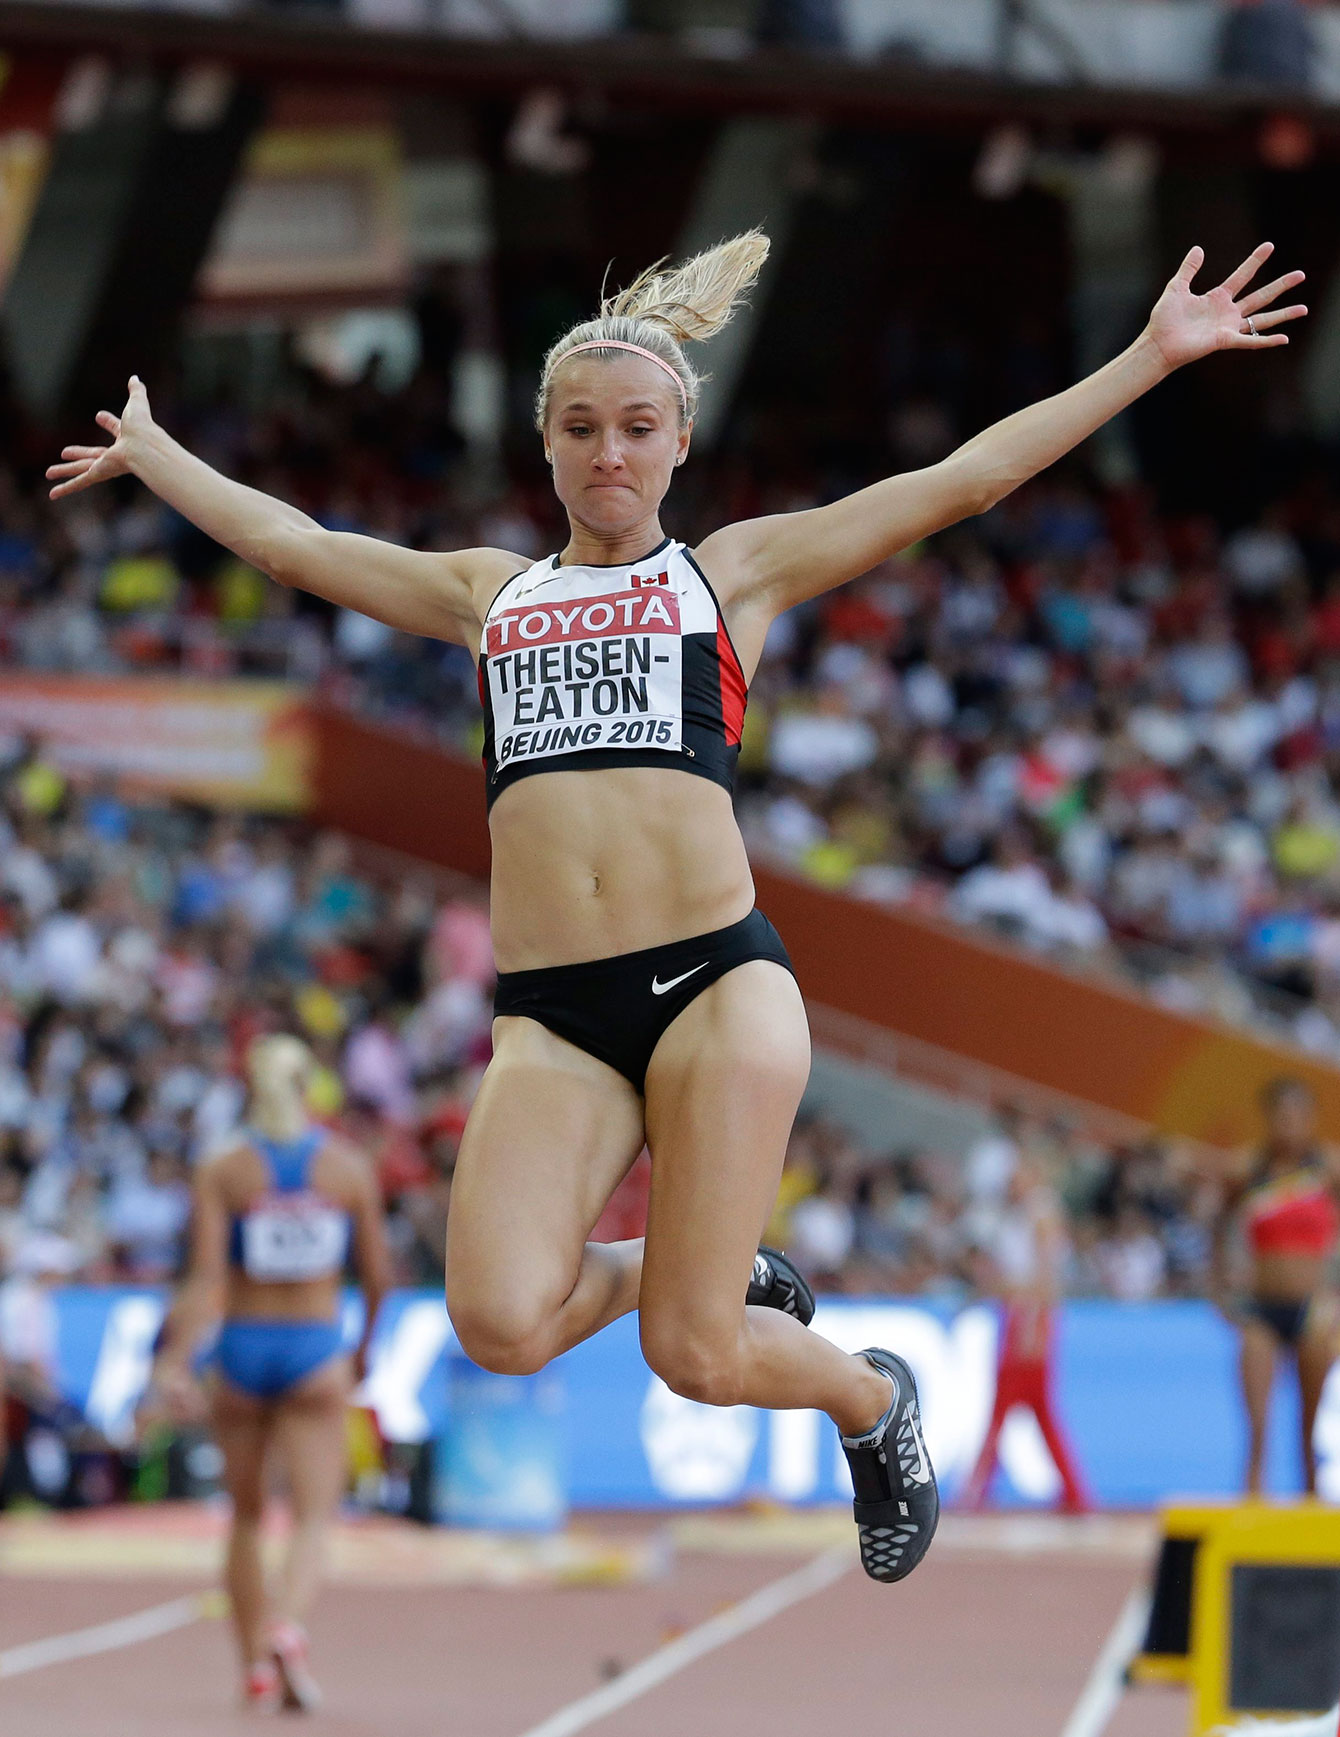 Brianne Theisen-Eaton's long jump of 6.55m at Beijing 2015 put her back in medal contention at the World Championships on August 23, 2015. 